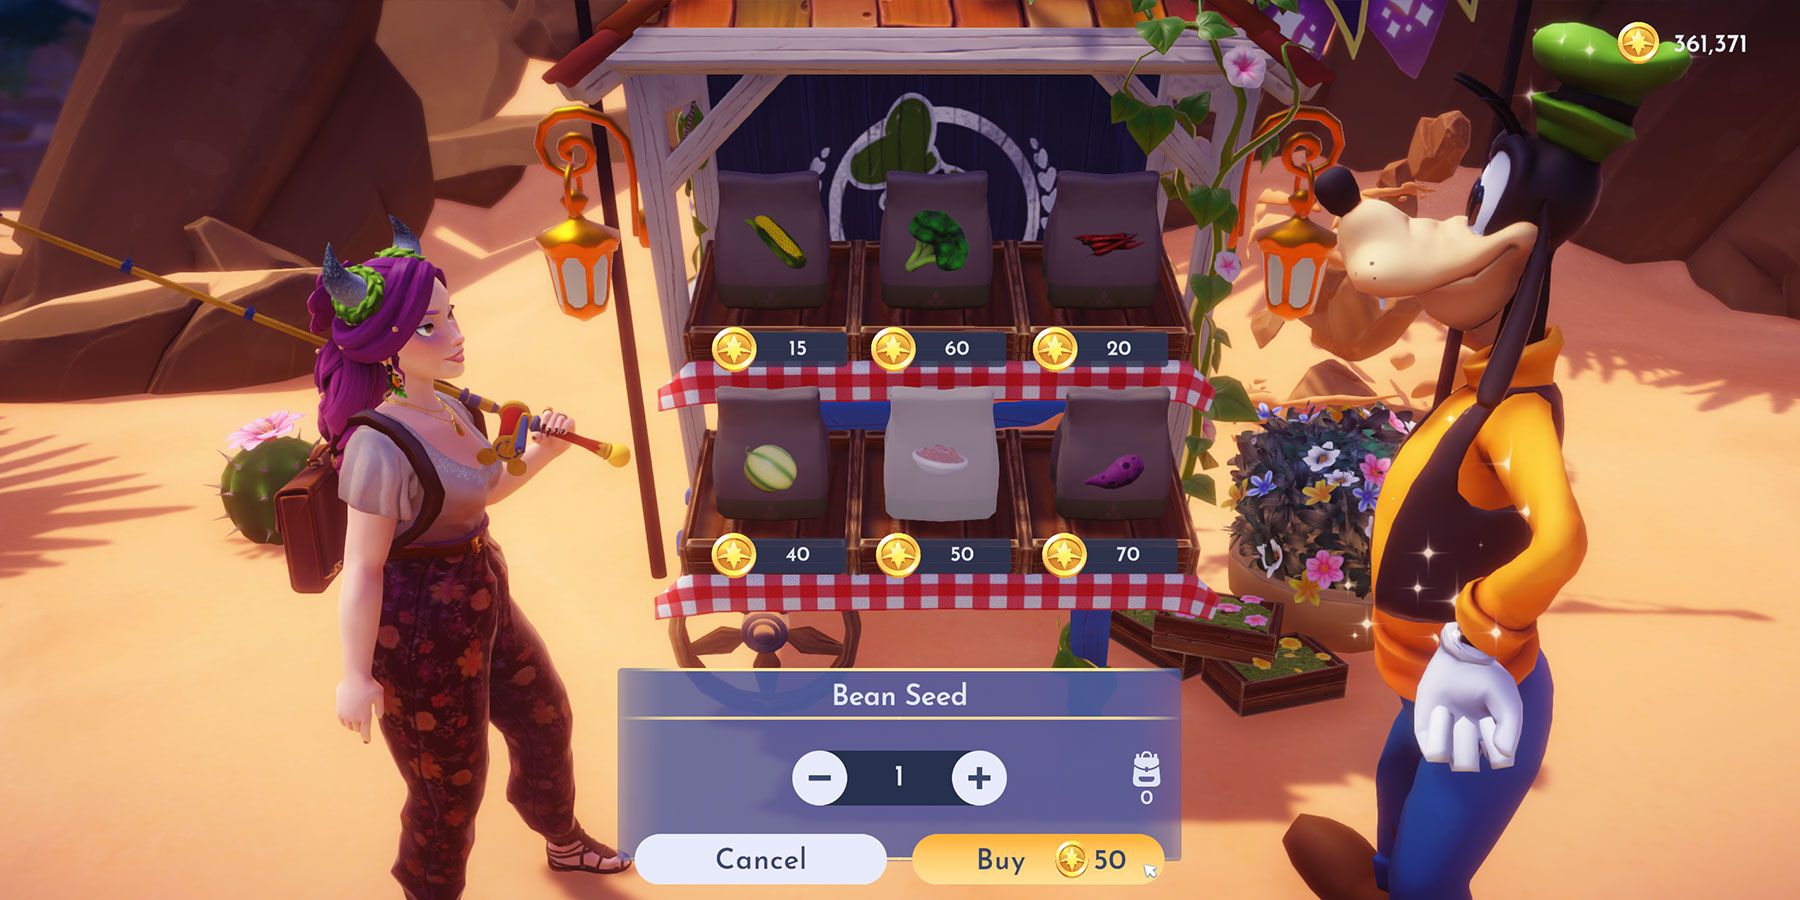 Buying Bean Seeds at Goofy's Stall in Disney Dreamlight Valley